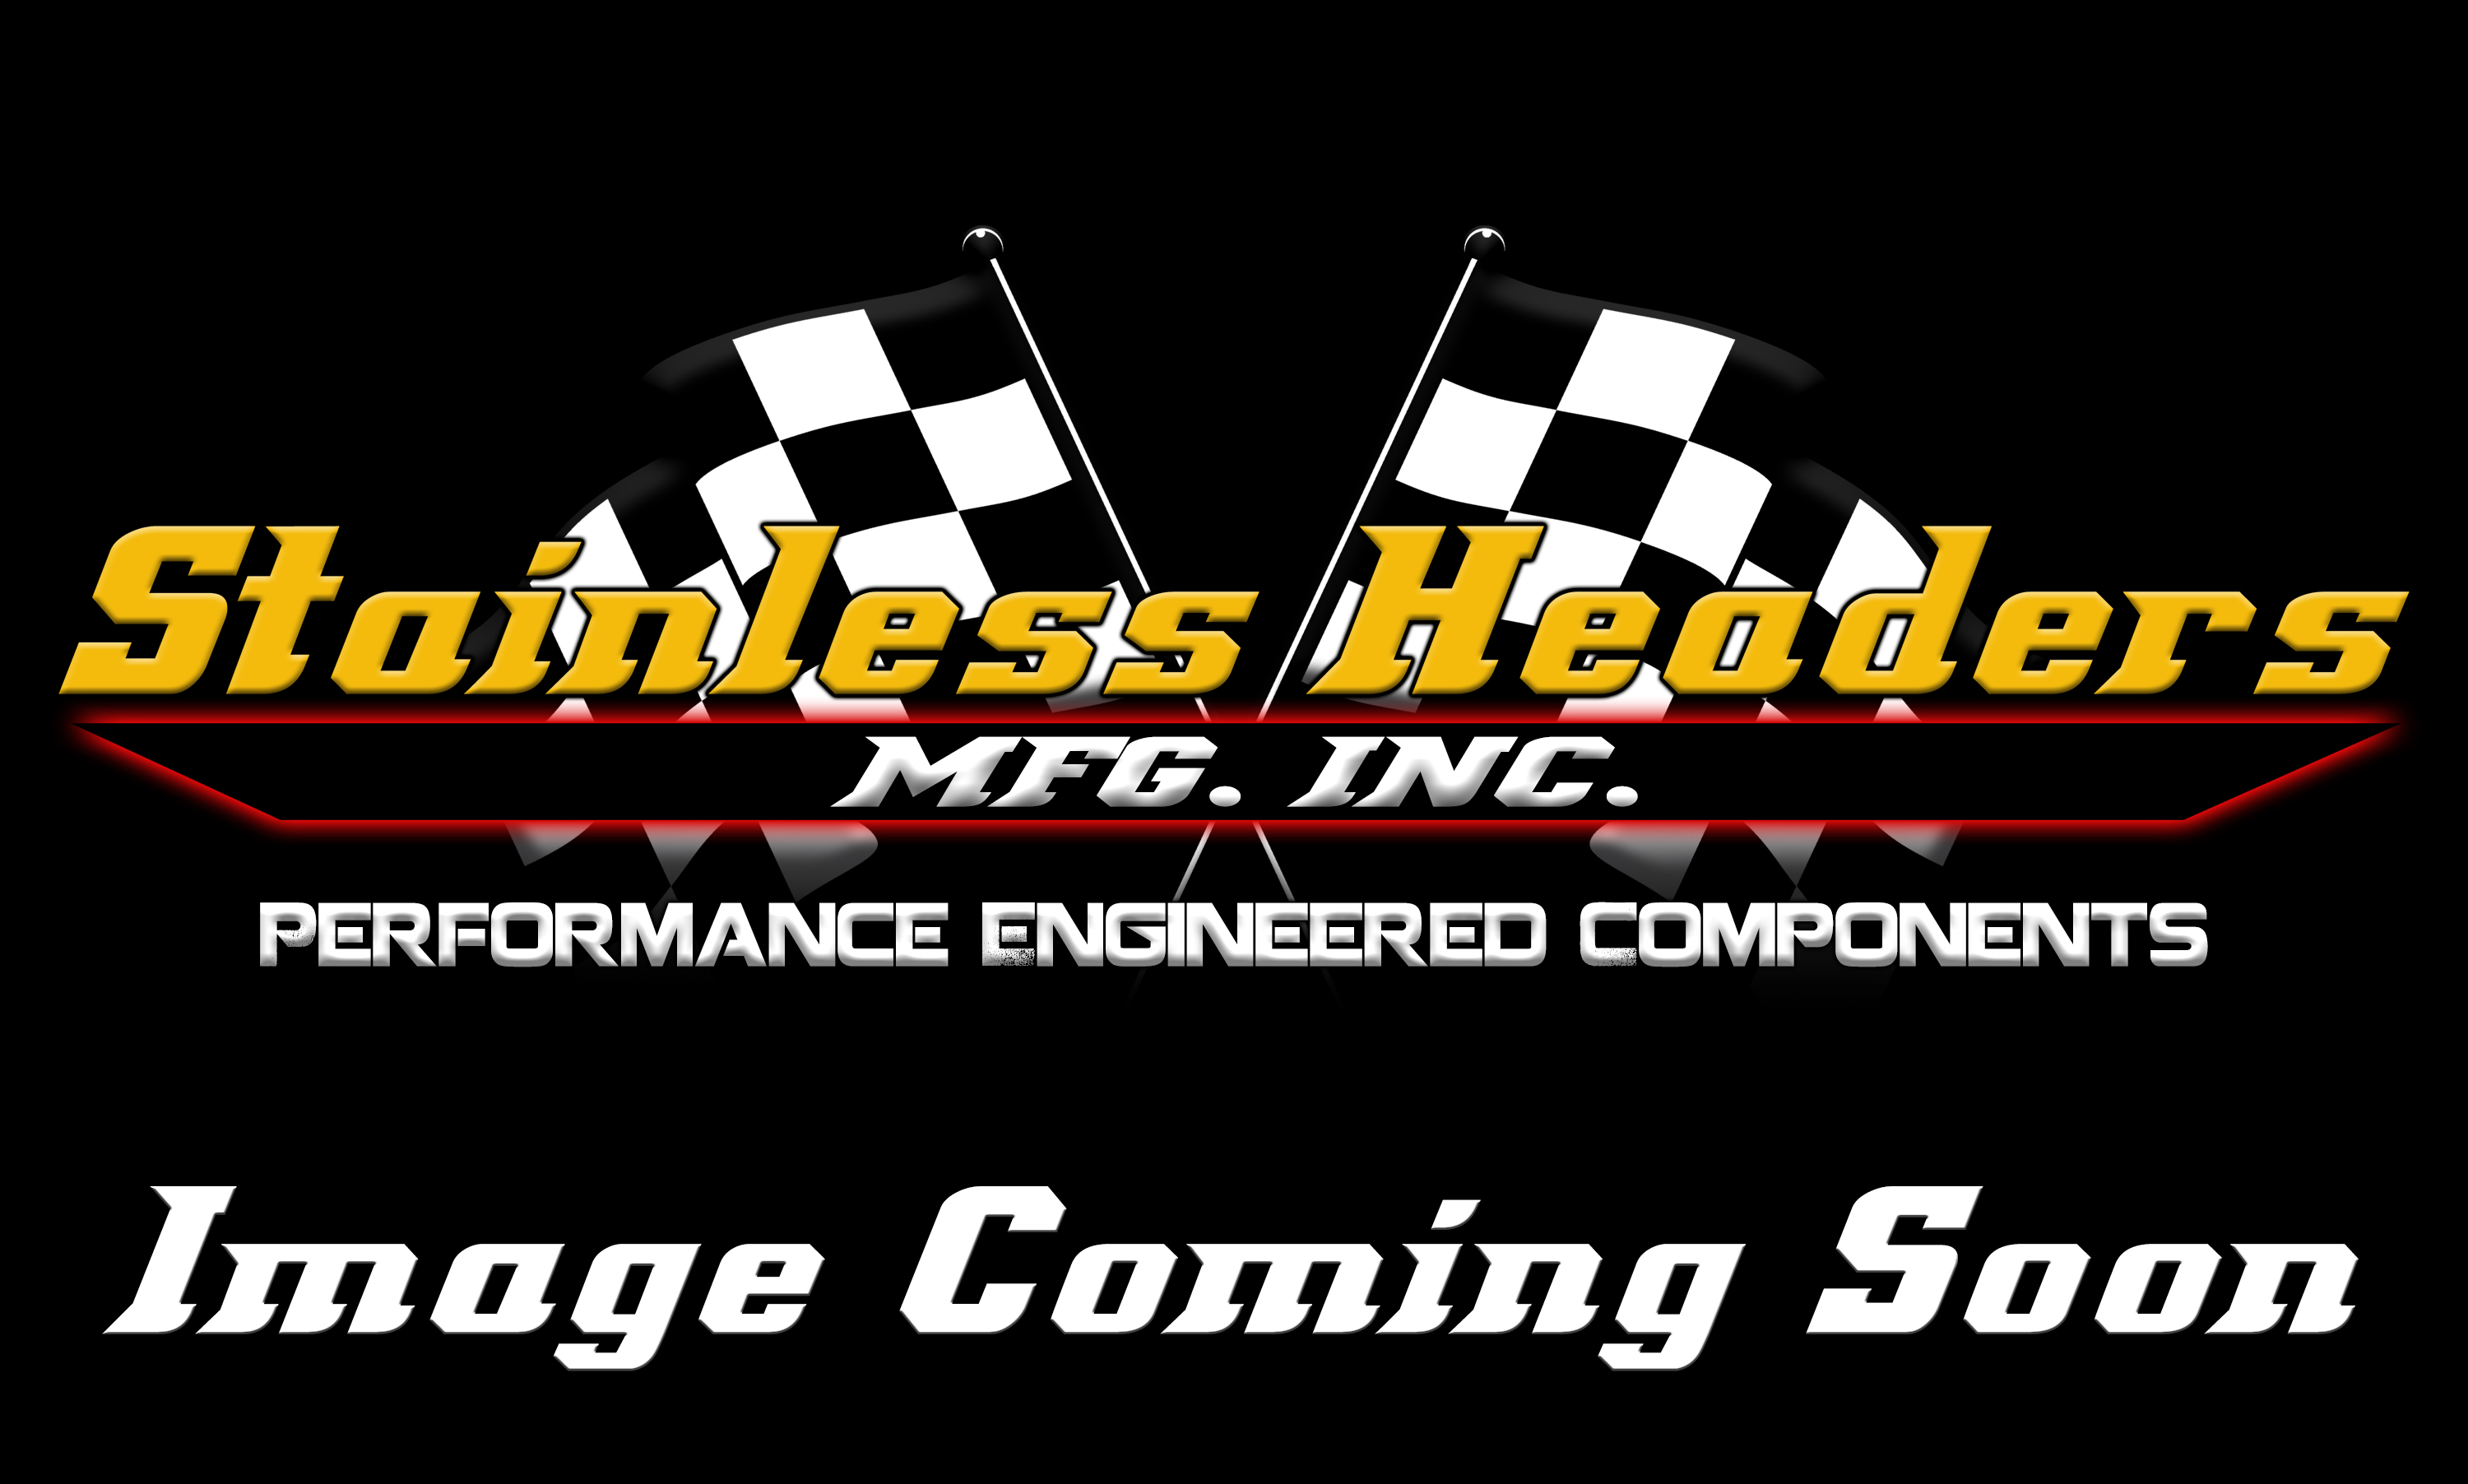 Stainless Headers - 2 1/2" Primary 5 into 1 Performance Merge Collector-16ga 321ss